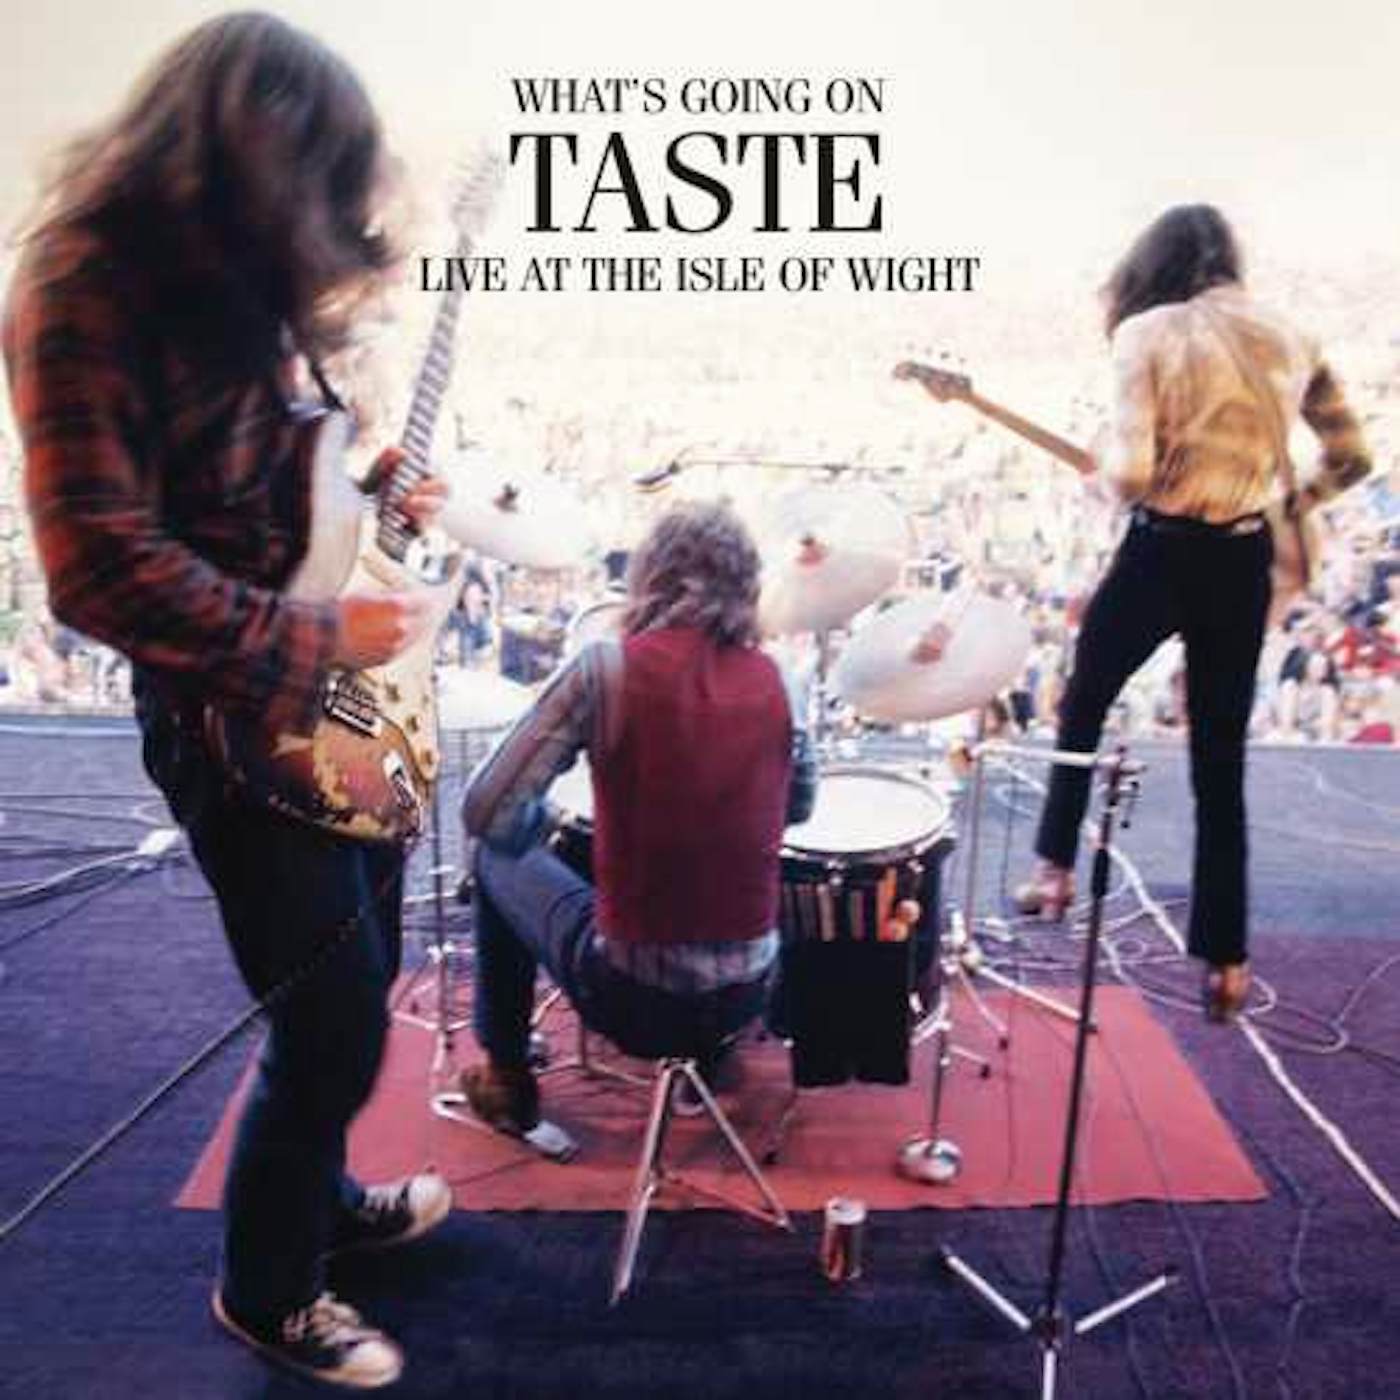 WHAT'S GOING ON TASTE LIVE AT THE ISLE OF WIGHT CD